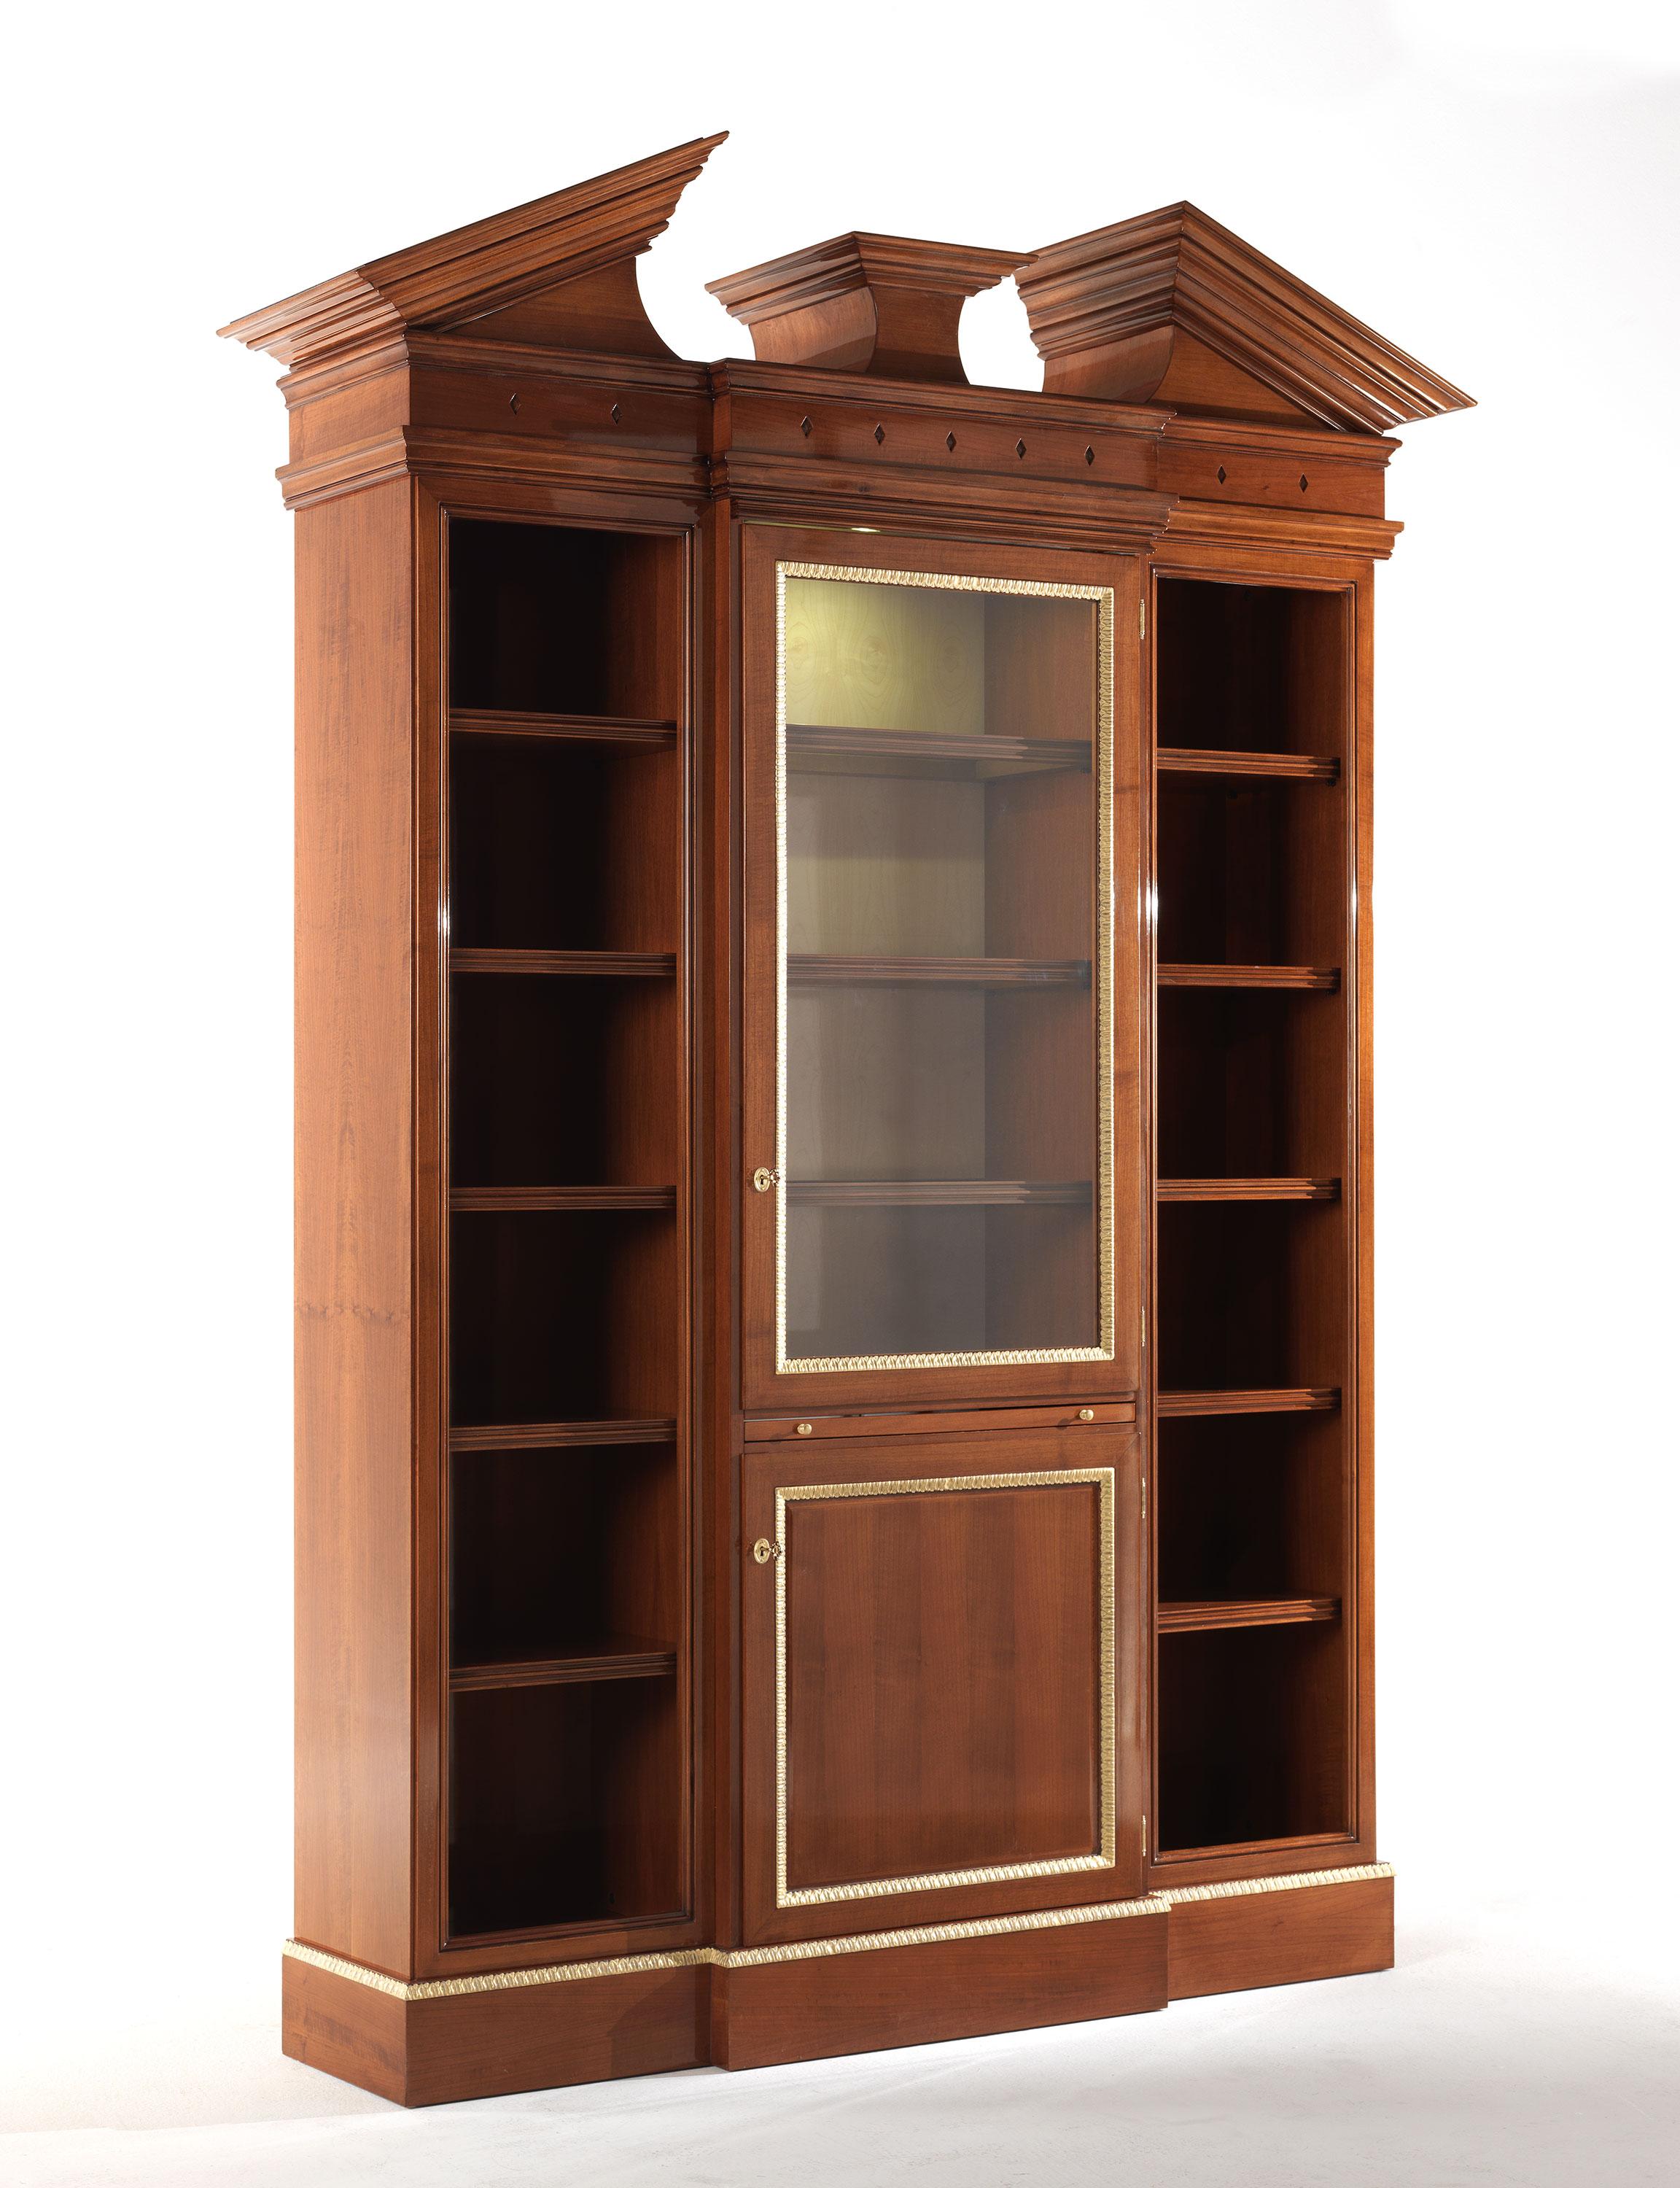 Classic lines and elegant finishes: Etoile showcase is a masterpiece of cabinetmaking. The walnut structure is enriched with natural maple inserts and details with antiqued and patinated gold leaf, adding a refined note to the whole.
Etoile showcase